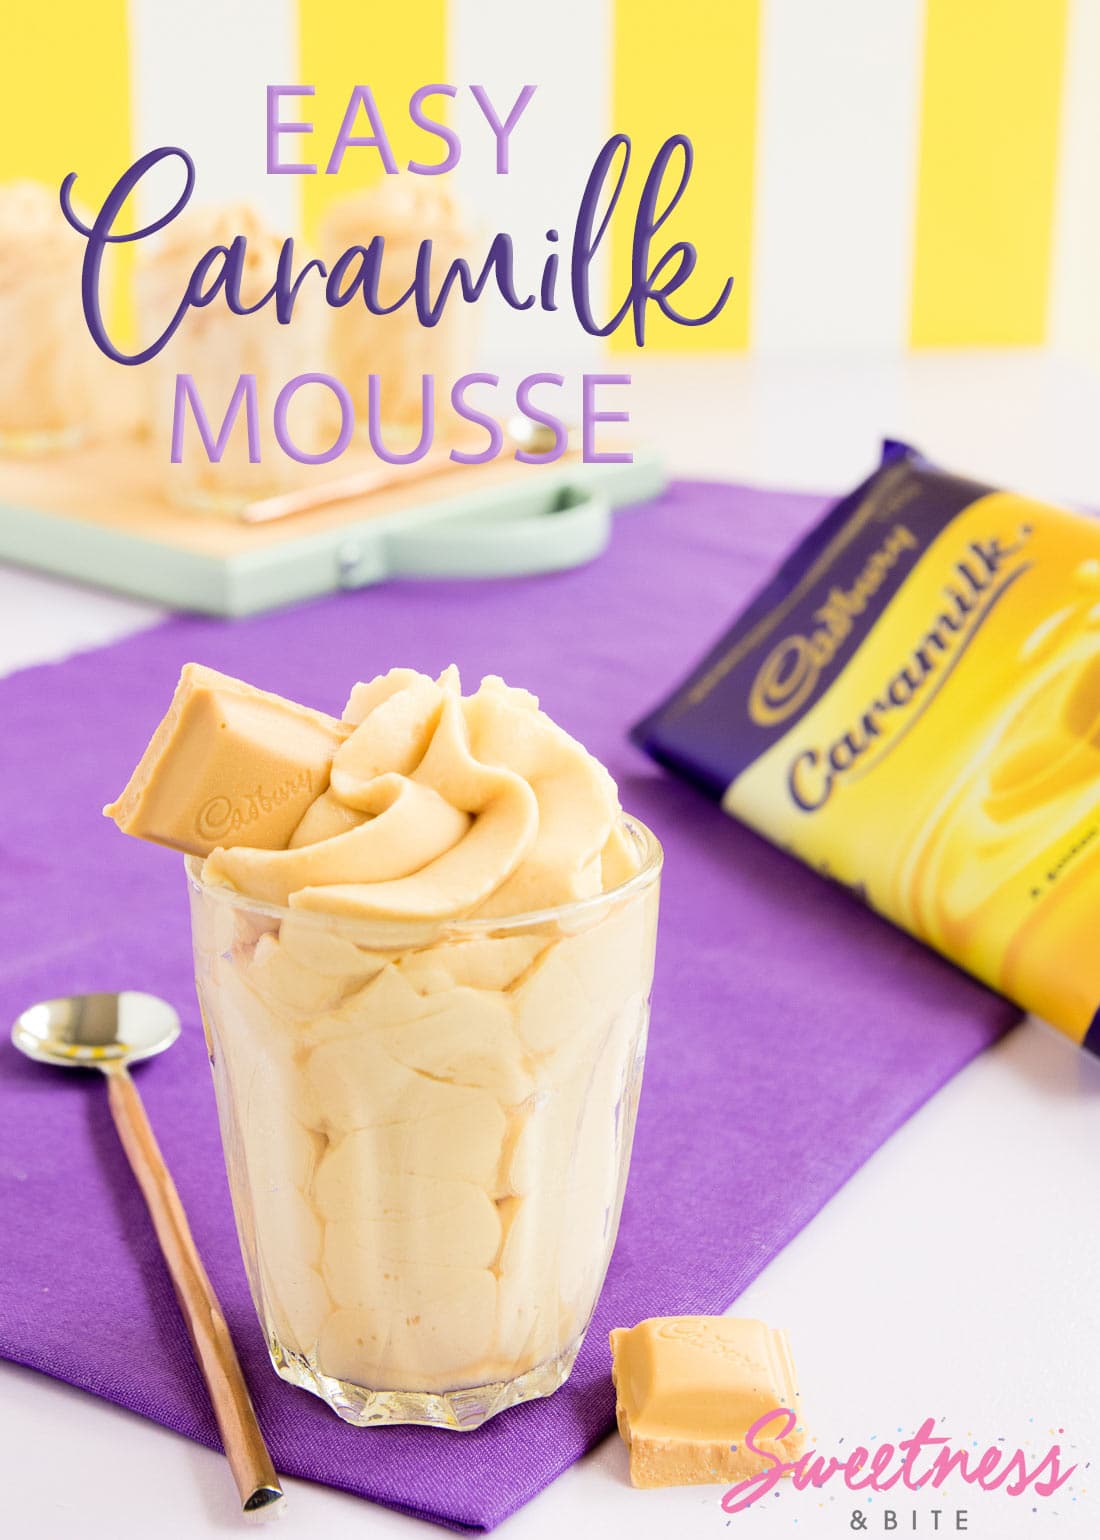 Caramilk Mousse piped in a swirl into a small glass, with a block of Caramilk chocolate in the background. Text overlay reads: Easy Caramilk Mousse.